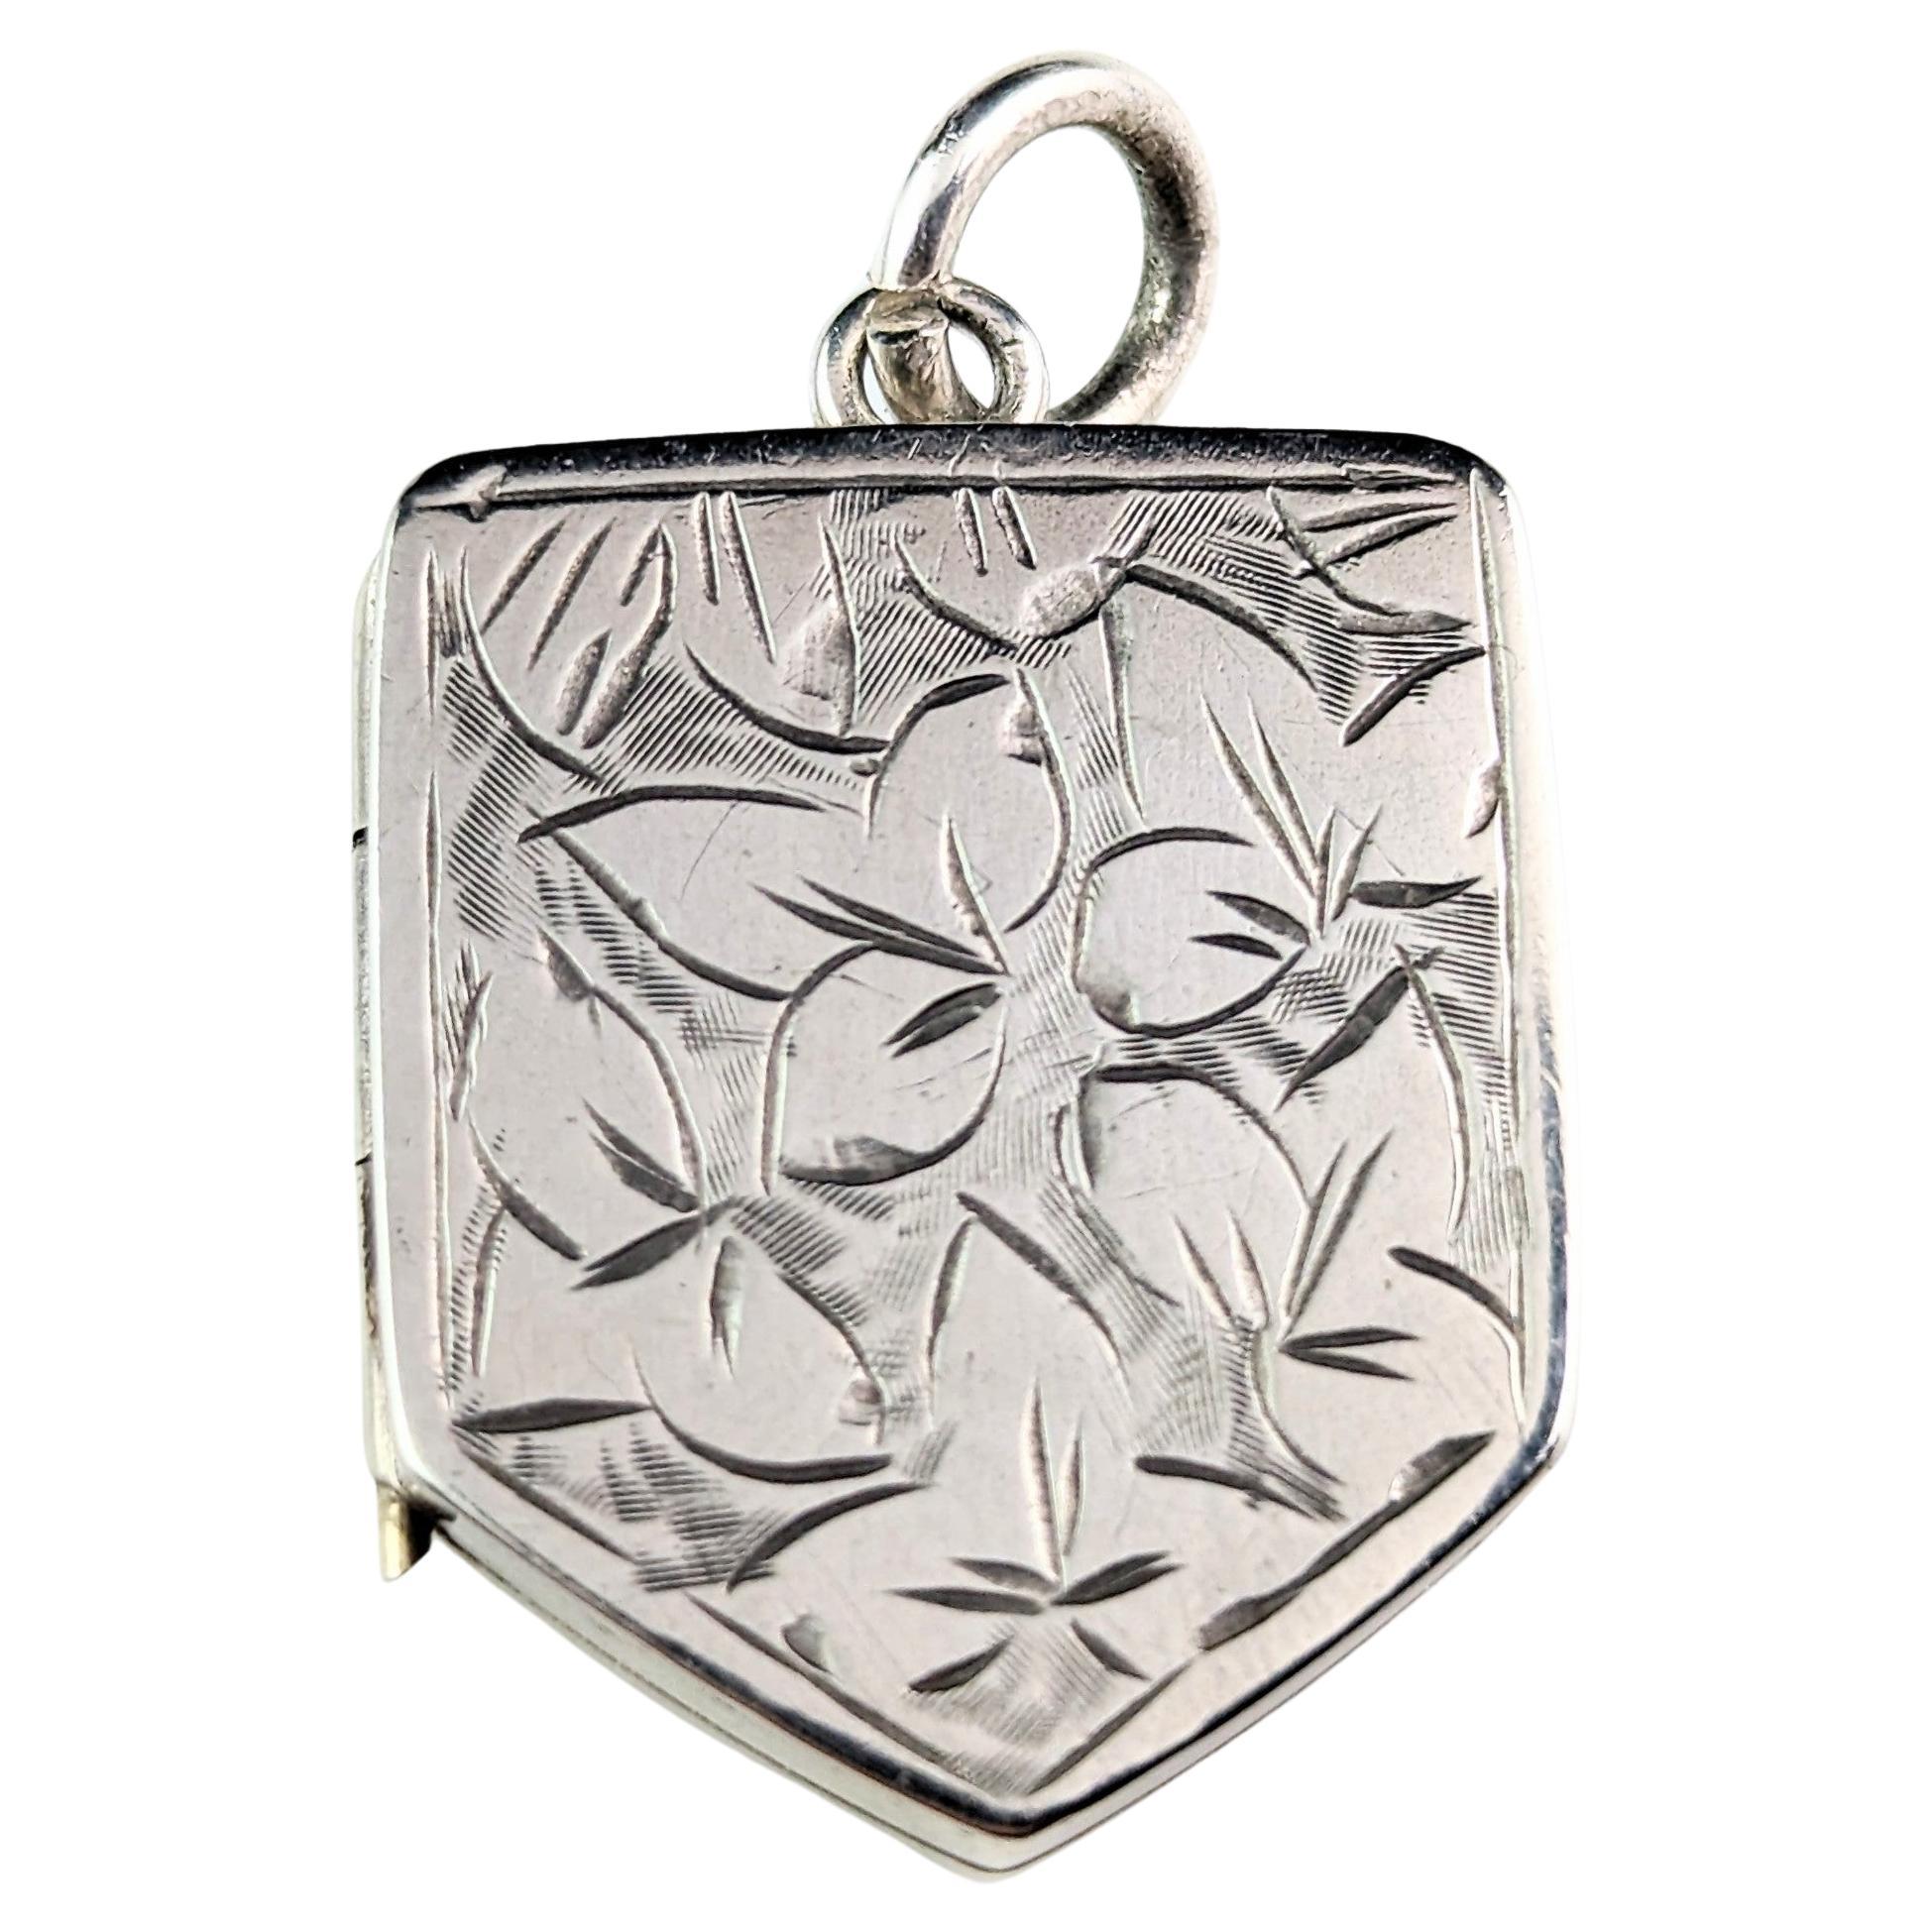 Buy quality Mesmerizing real silver heirloom purse bag in fine carvings